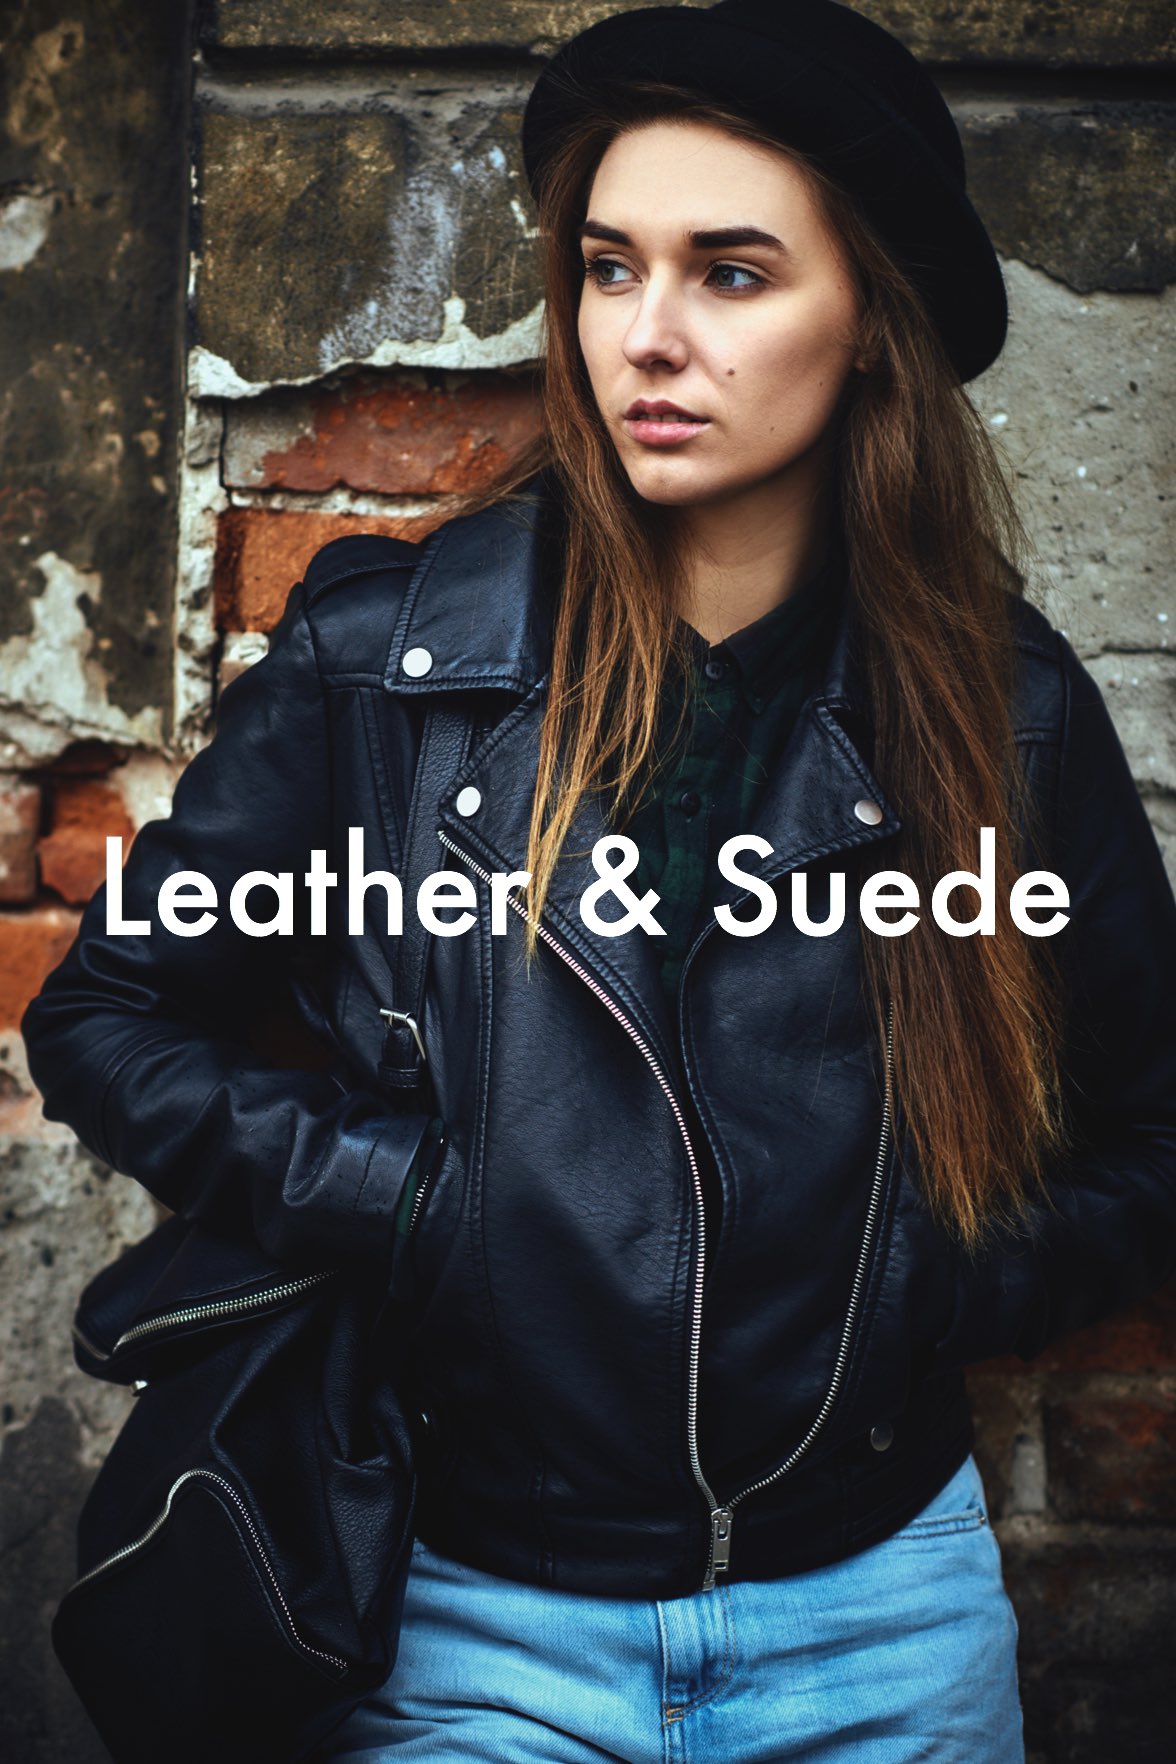 Leather & Suede